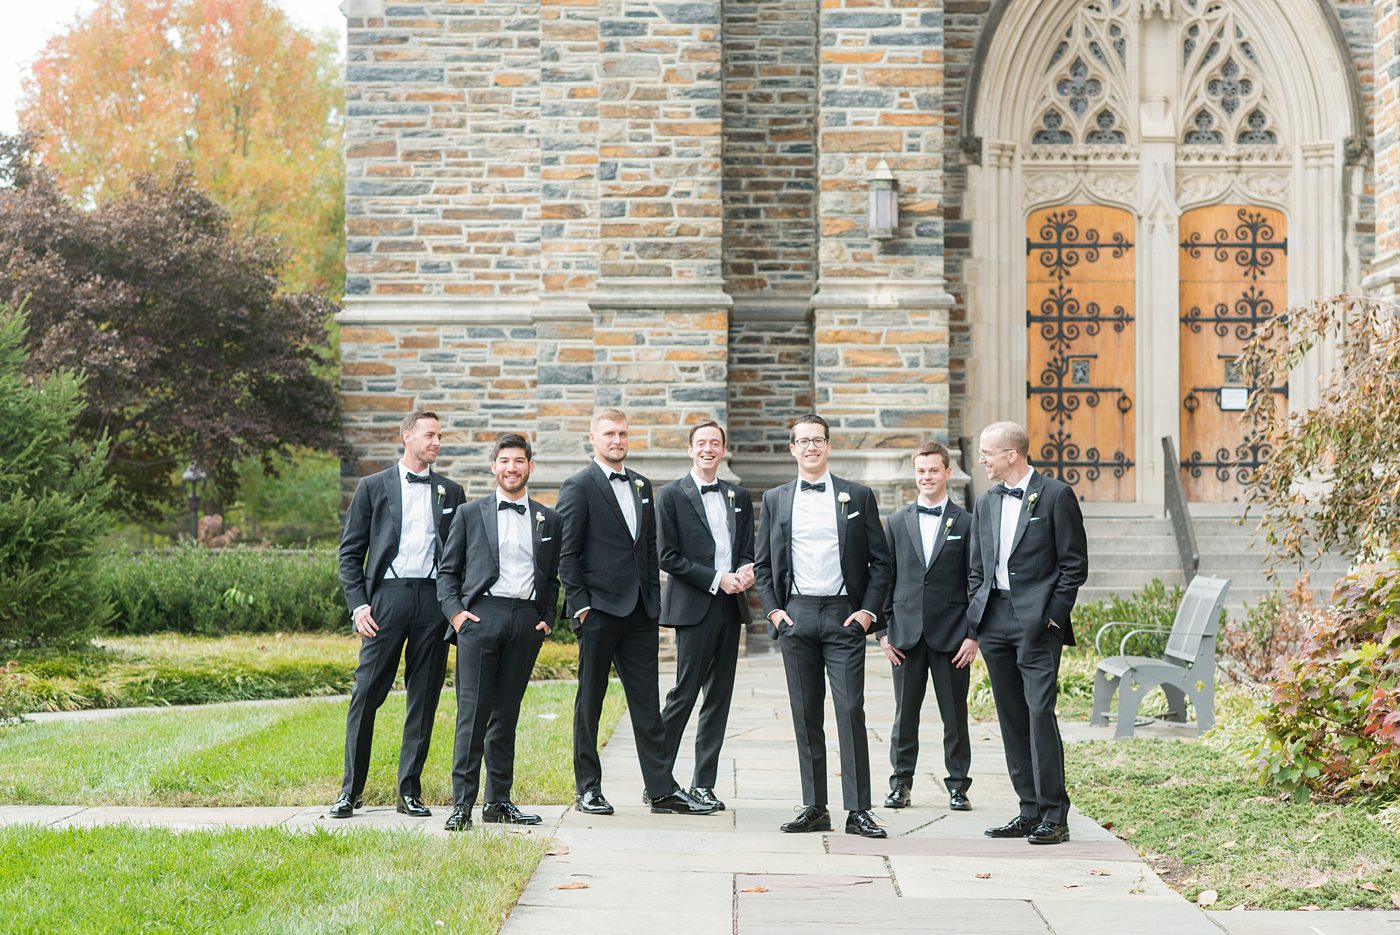 Wedding photographer Mikkel Paige Photography captures a ceremony at Duke Chapel and reception at The Rickhouse, a beautiful downtown venue in Durham, North Carolina. The groom and groomsmen wore classic black tuxedos. #durhamweddingphotographer #DukeChapelWedding #DurhamWeddingNorthCarolina #DurhamWeddingPhotographer #MikkelPaige #groomstyle #groomsmen